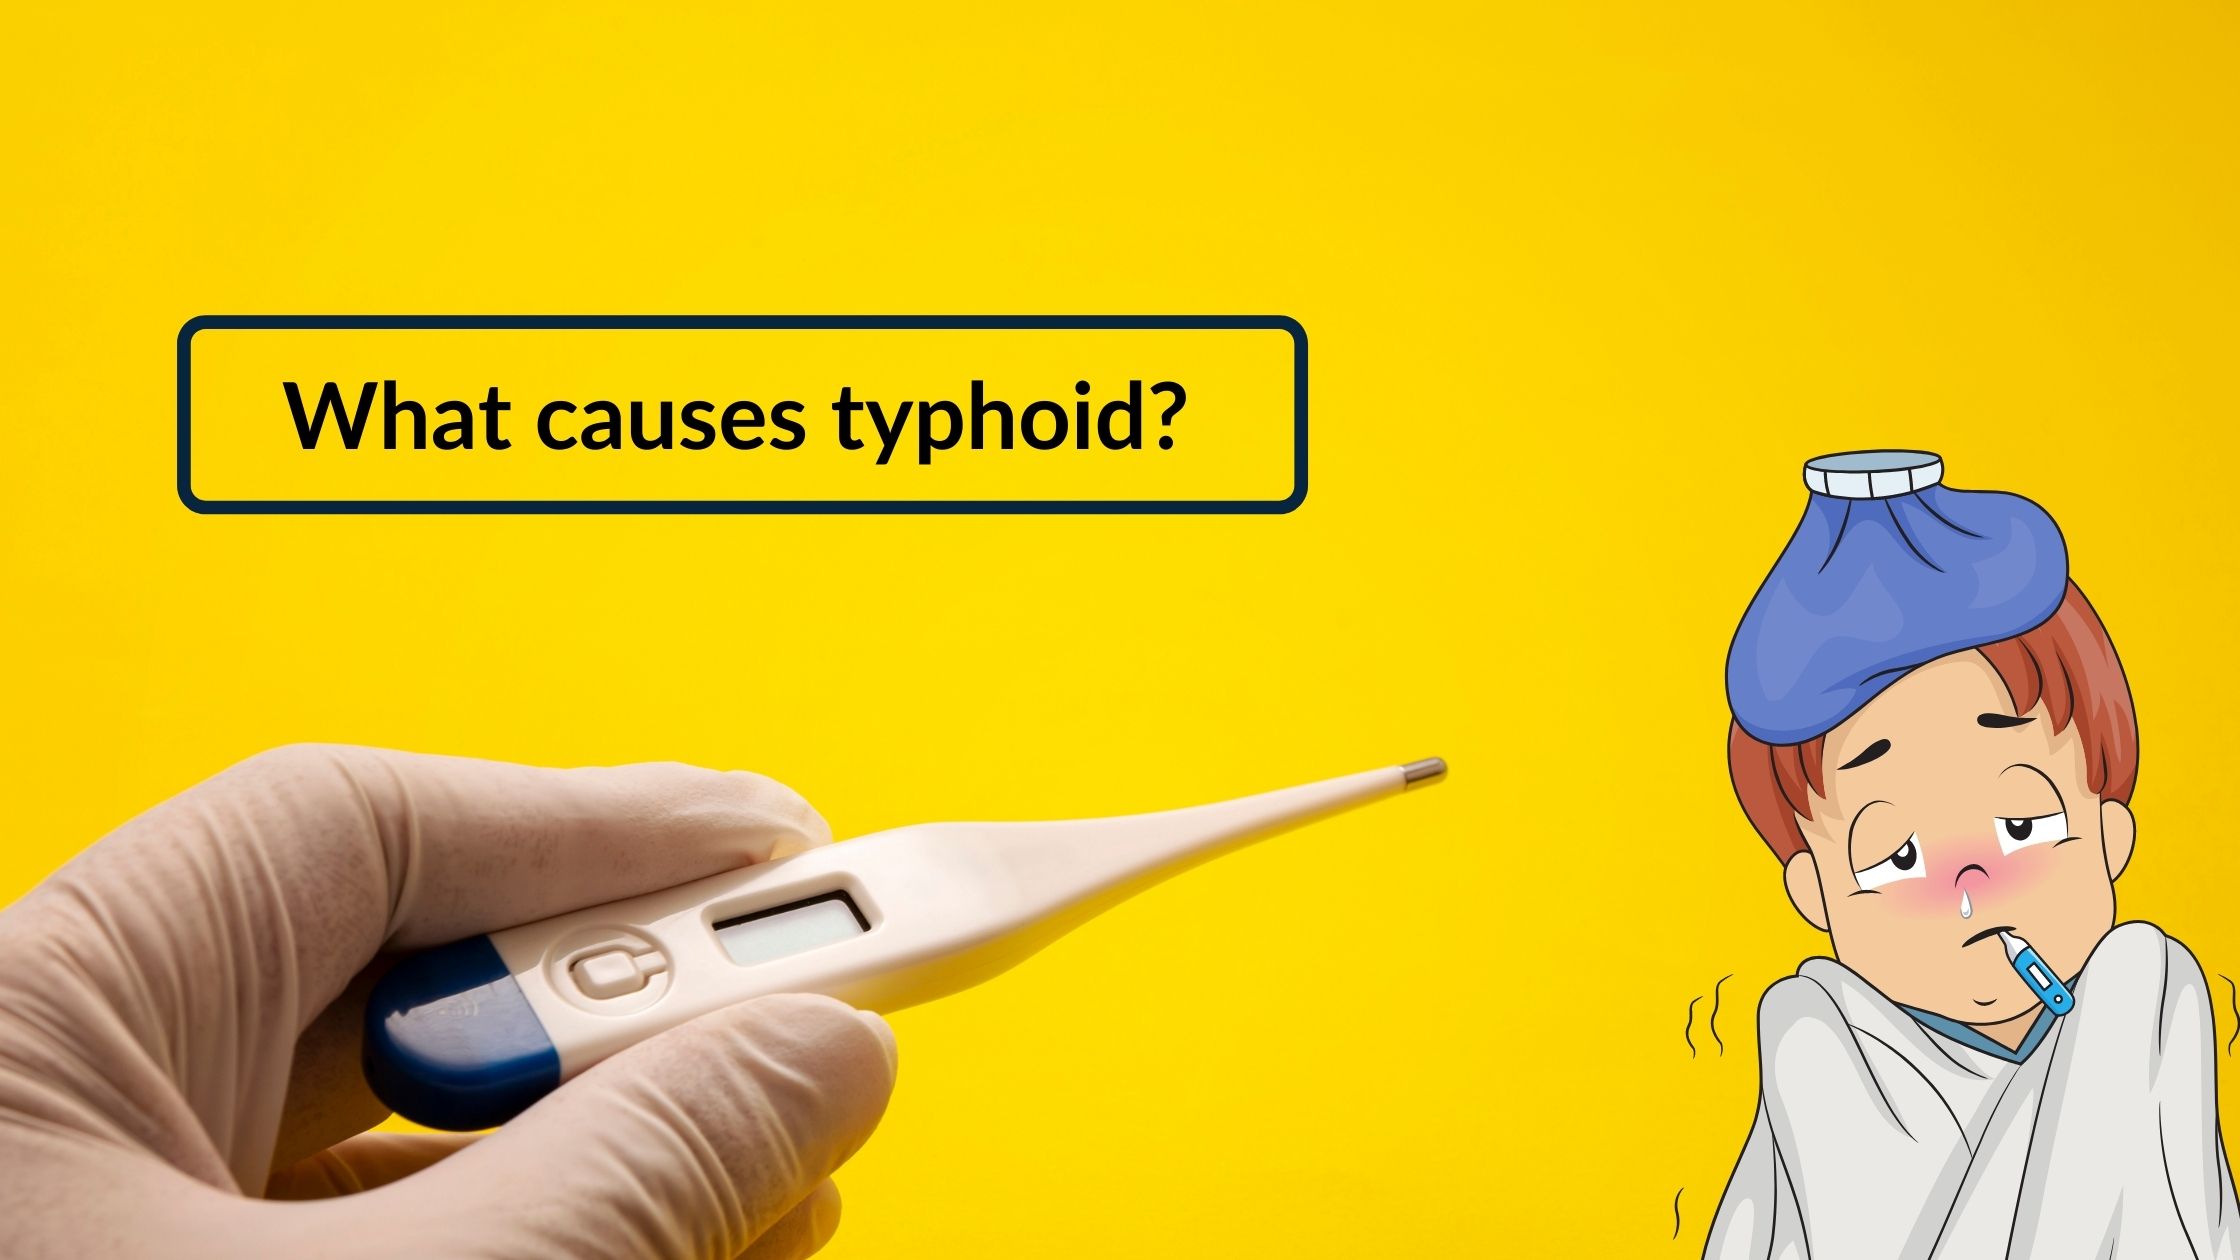 What causes typhoid